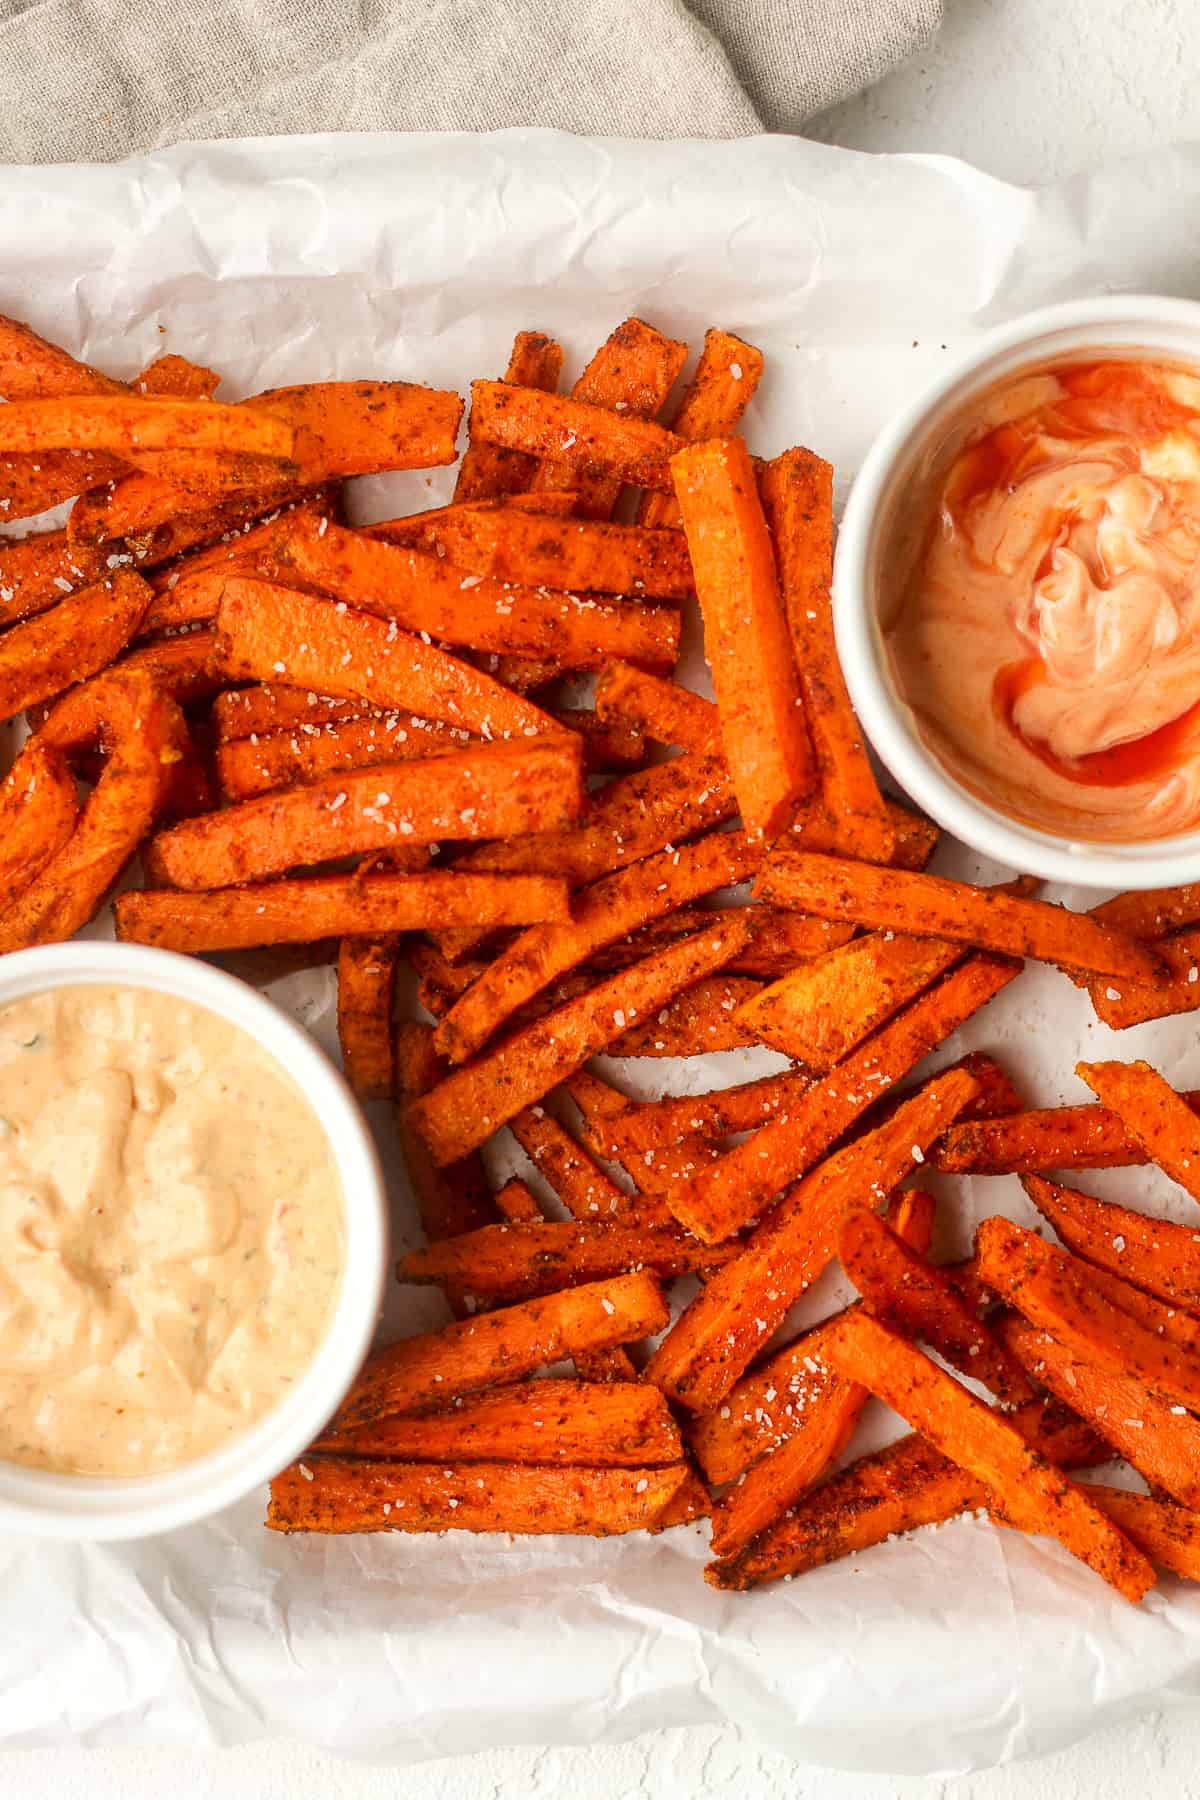 Overhead view of some sweet potato fries with sauce.